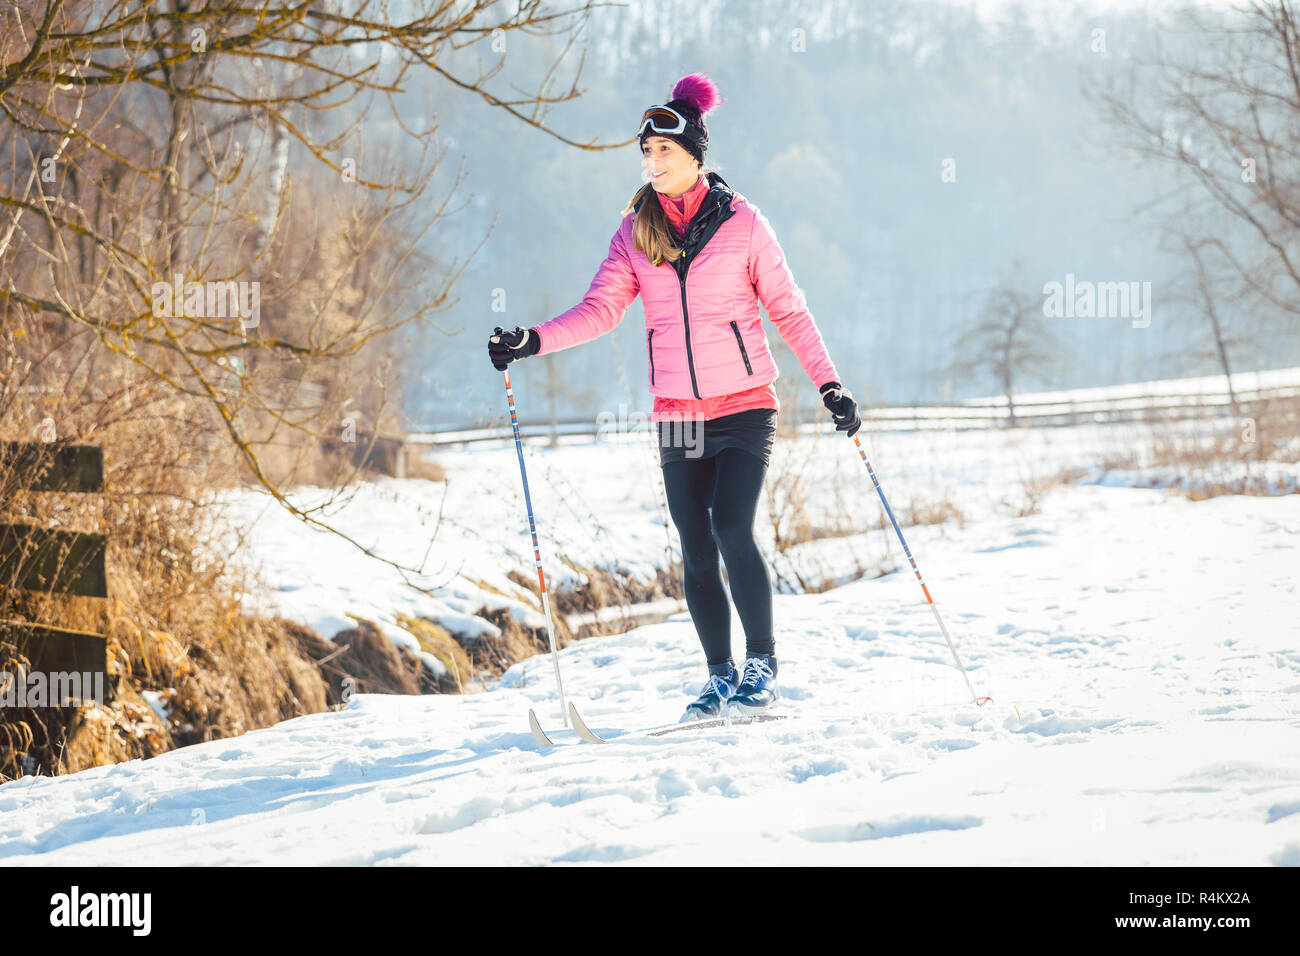 Woman doing cross country skiing as winter sport Stock Photo